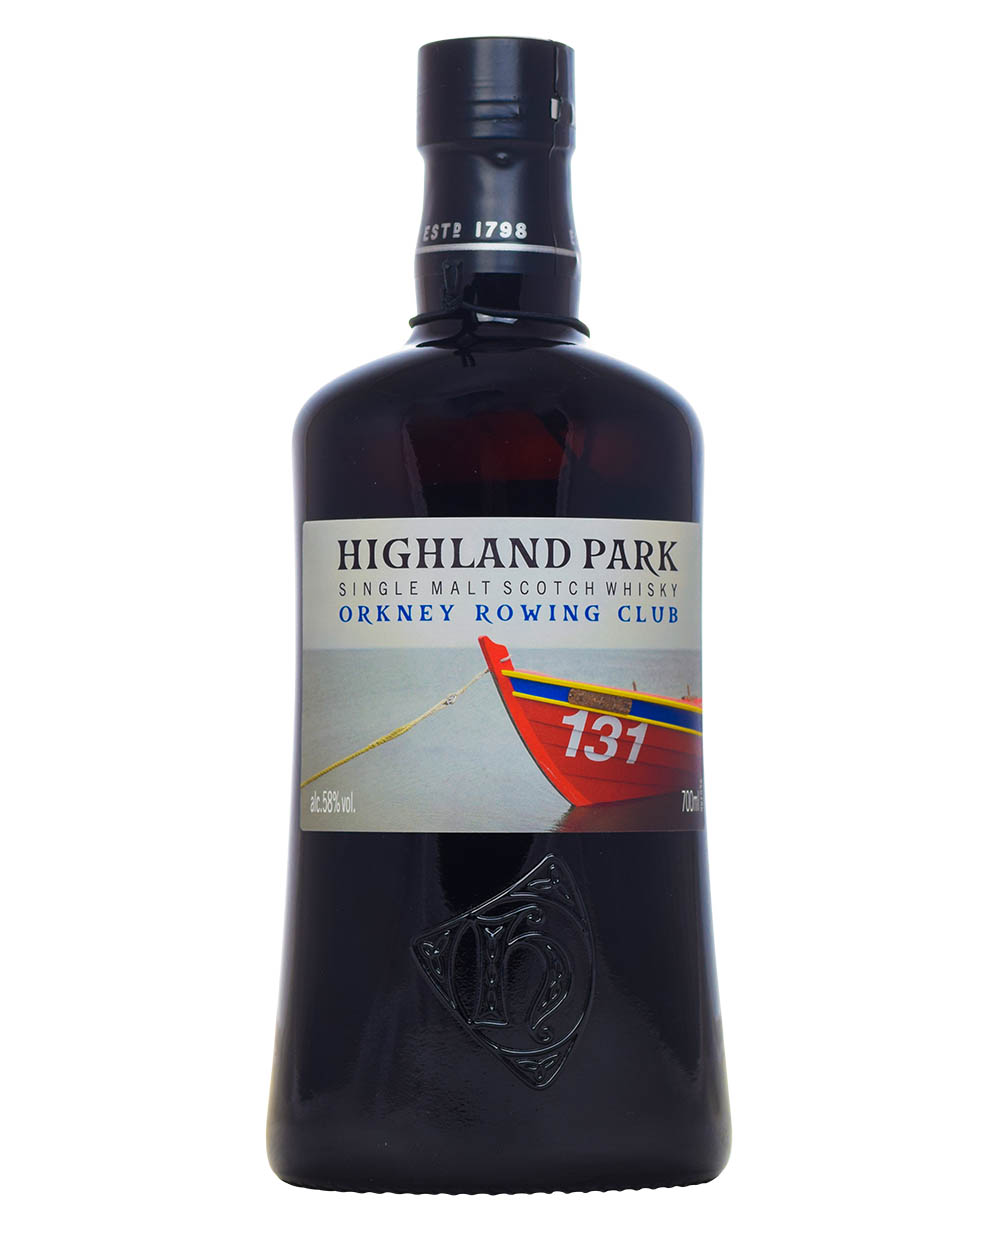 Highland Park Orkney Rowing Club Musthave Malts MHM